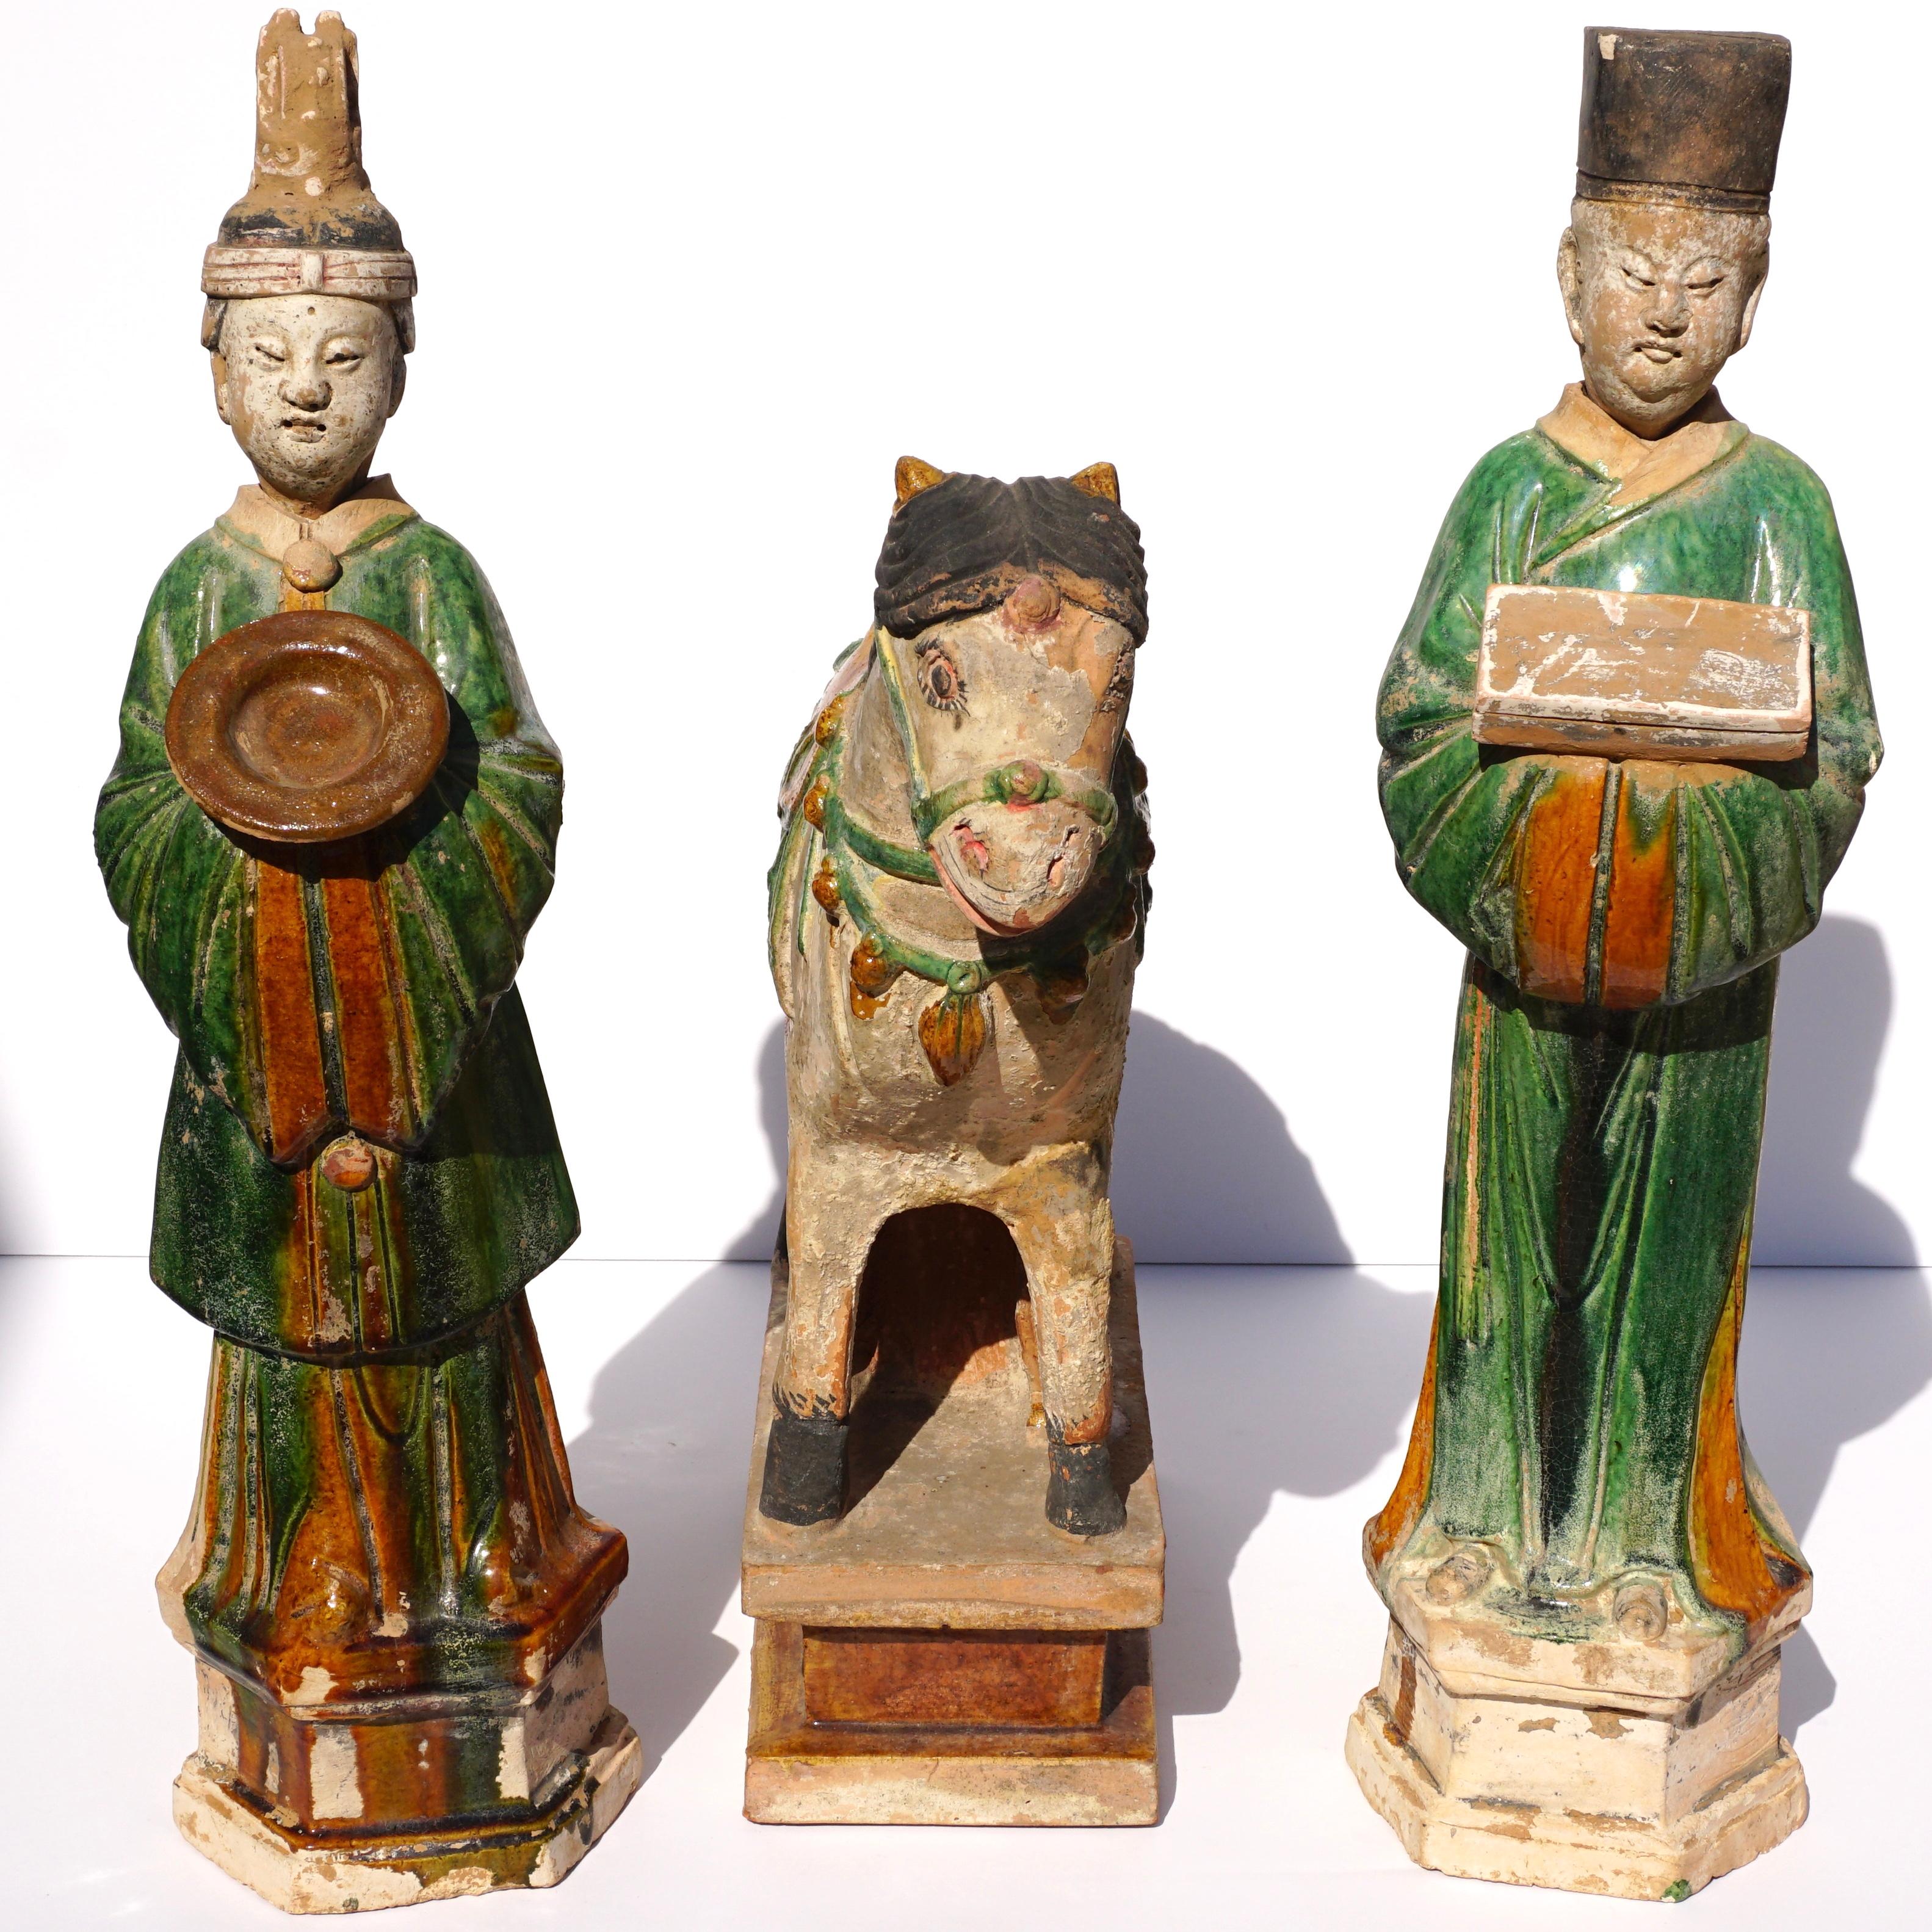 A large a monumental set of pottery Terrecotta tomb figures representing Male and Female dignitaries bearing gifts along with a saddled Horse. All sculptures are Sancai glazed with Signature ming green and brown colors. This particular collection is